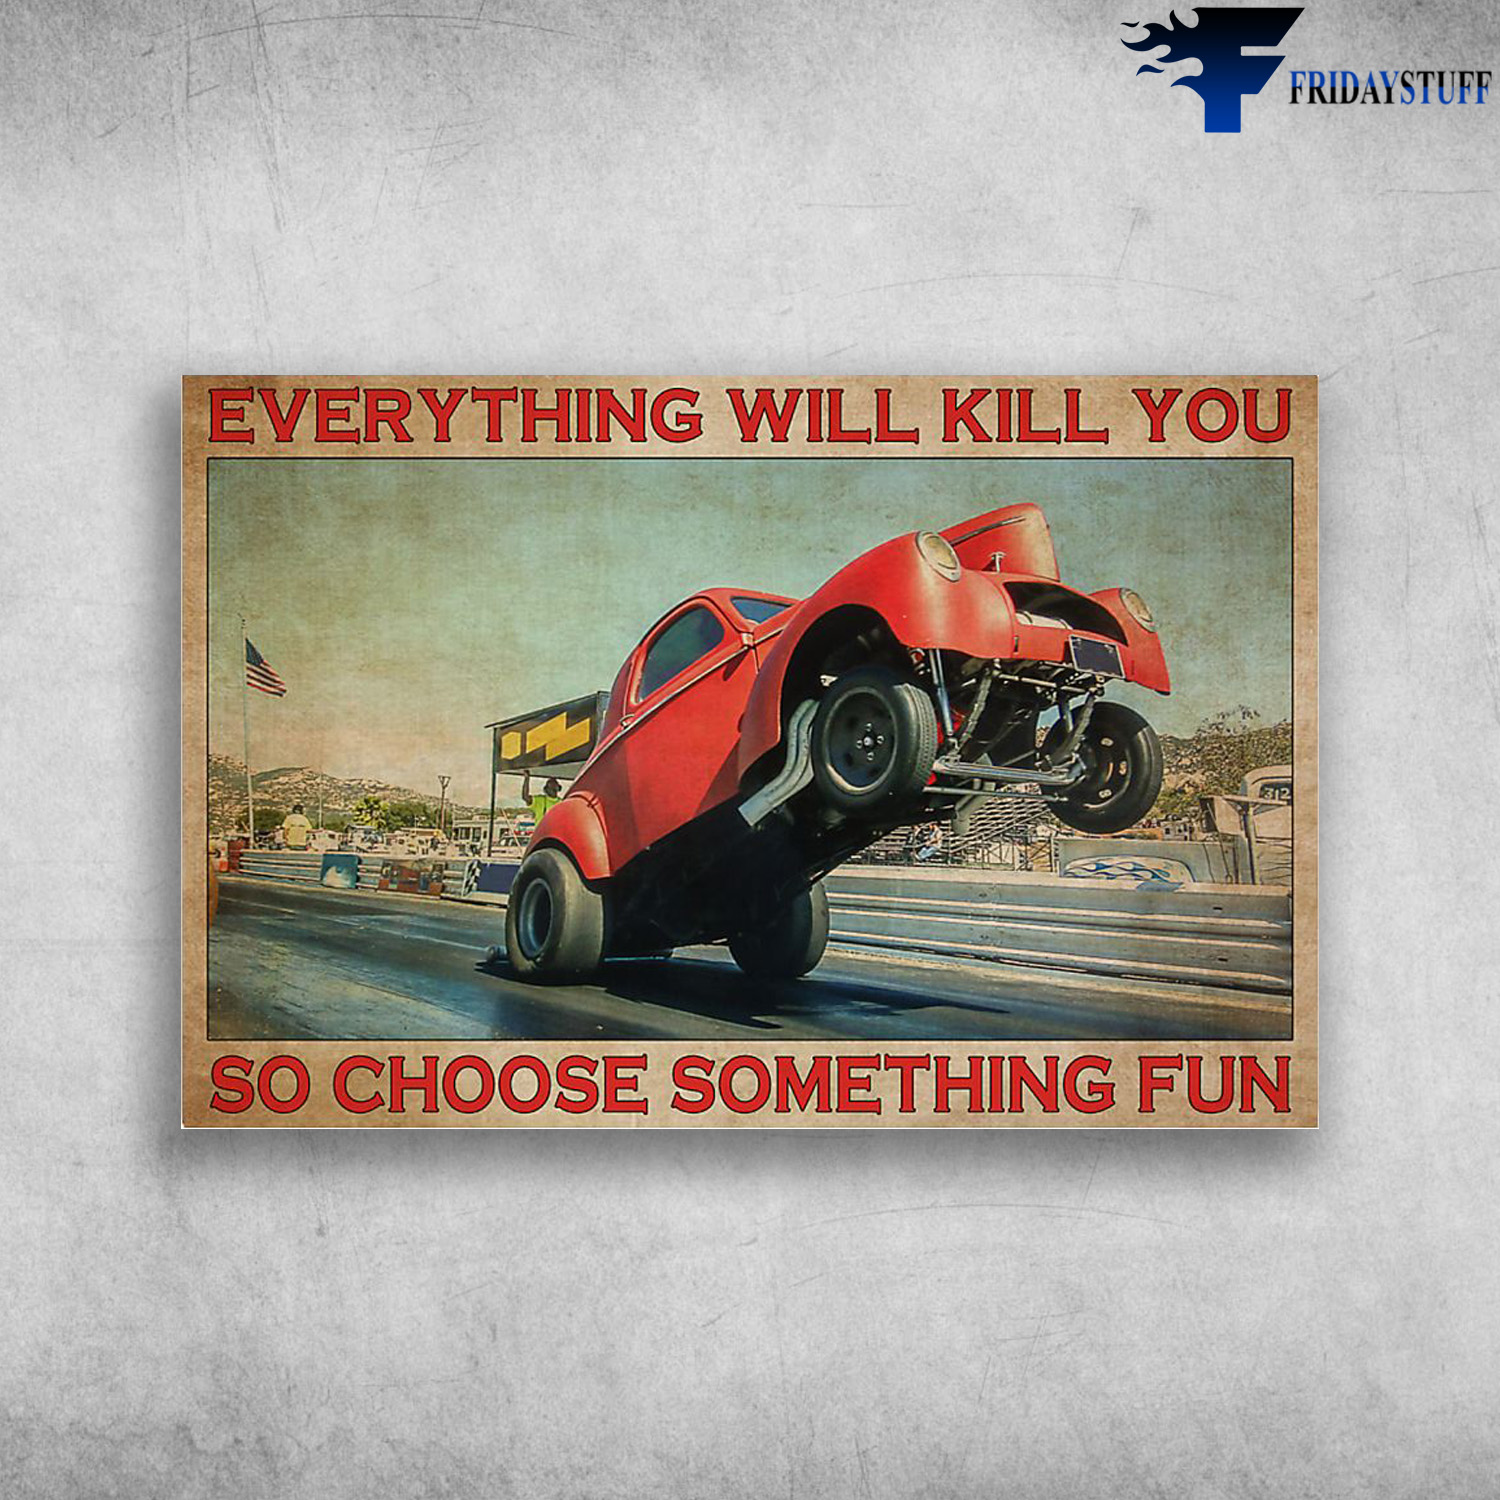 Red Hot Rod Drag Cracing - Everything Will Kill You, So Choose Something Fun